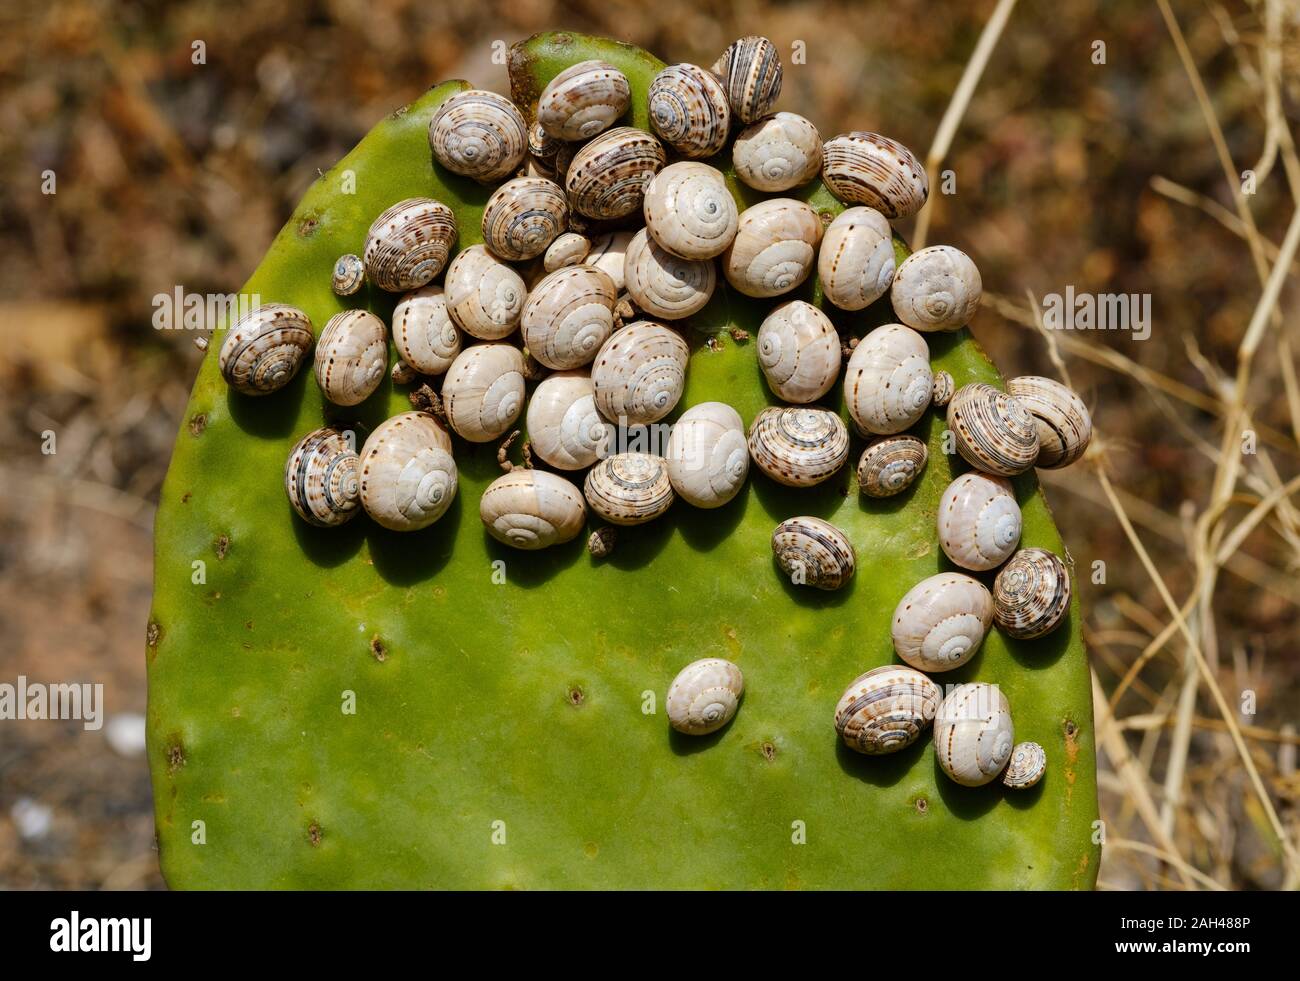 Spain, Canary Islands, Prickly pear cactus covered in snails Stock Photo